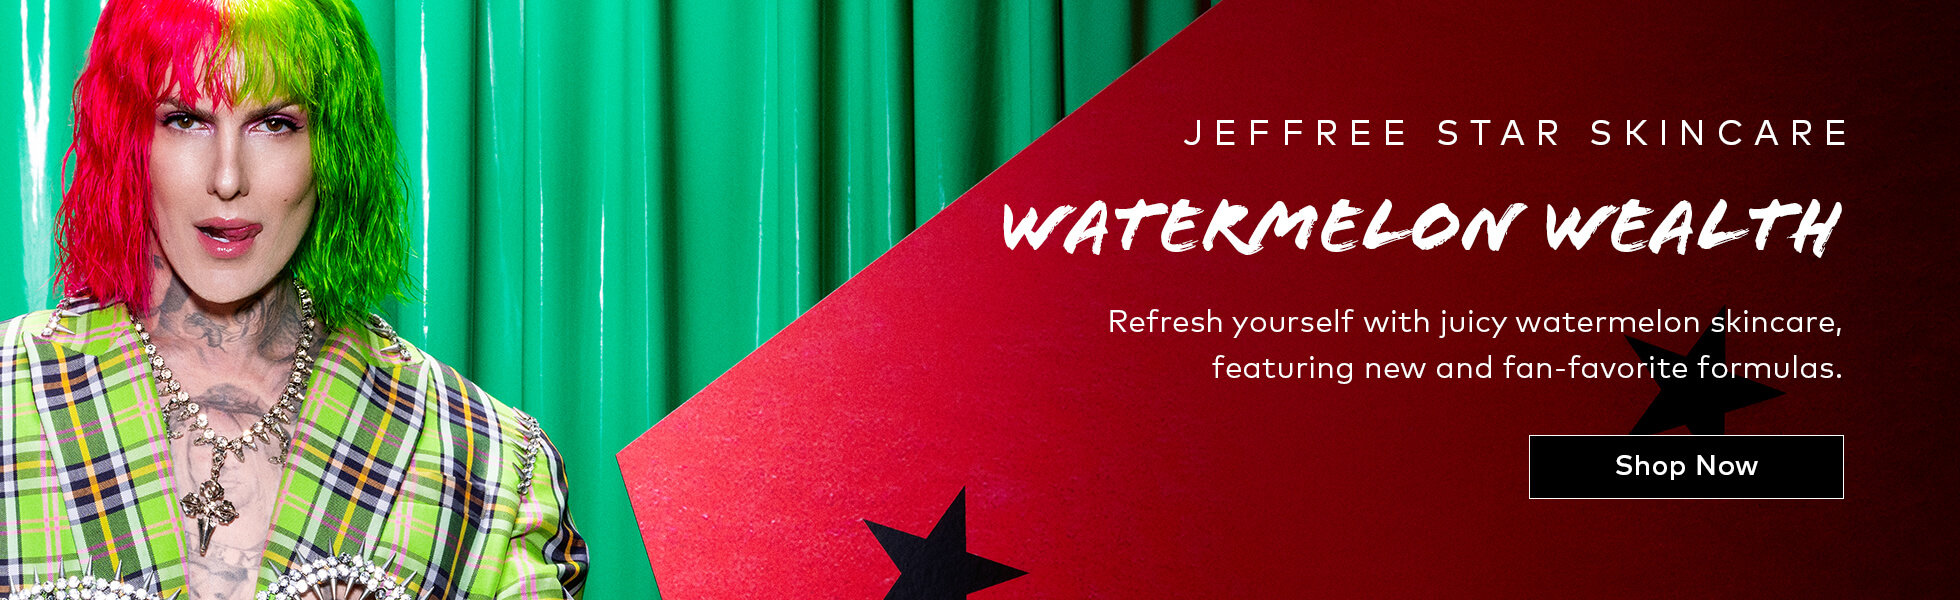 A new limited edition collection from Jeffree Star. Shop the Watermelon Wealth Collection at Beautylish.com